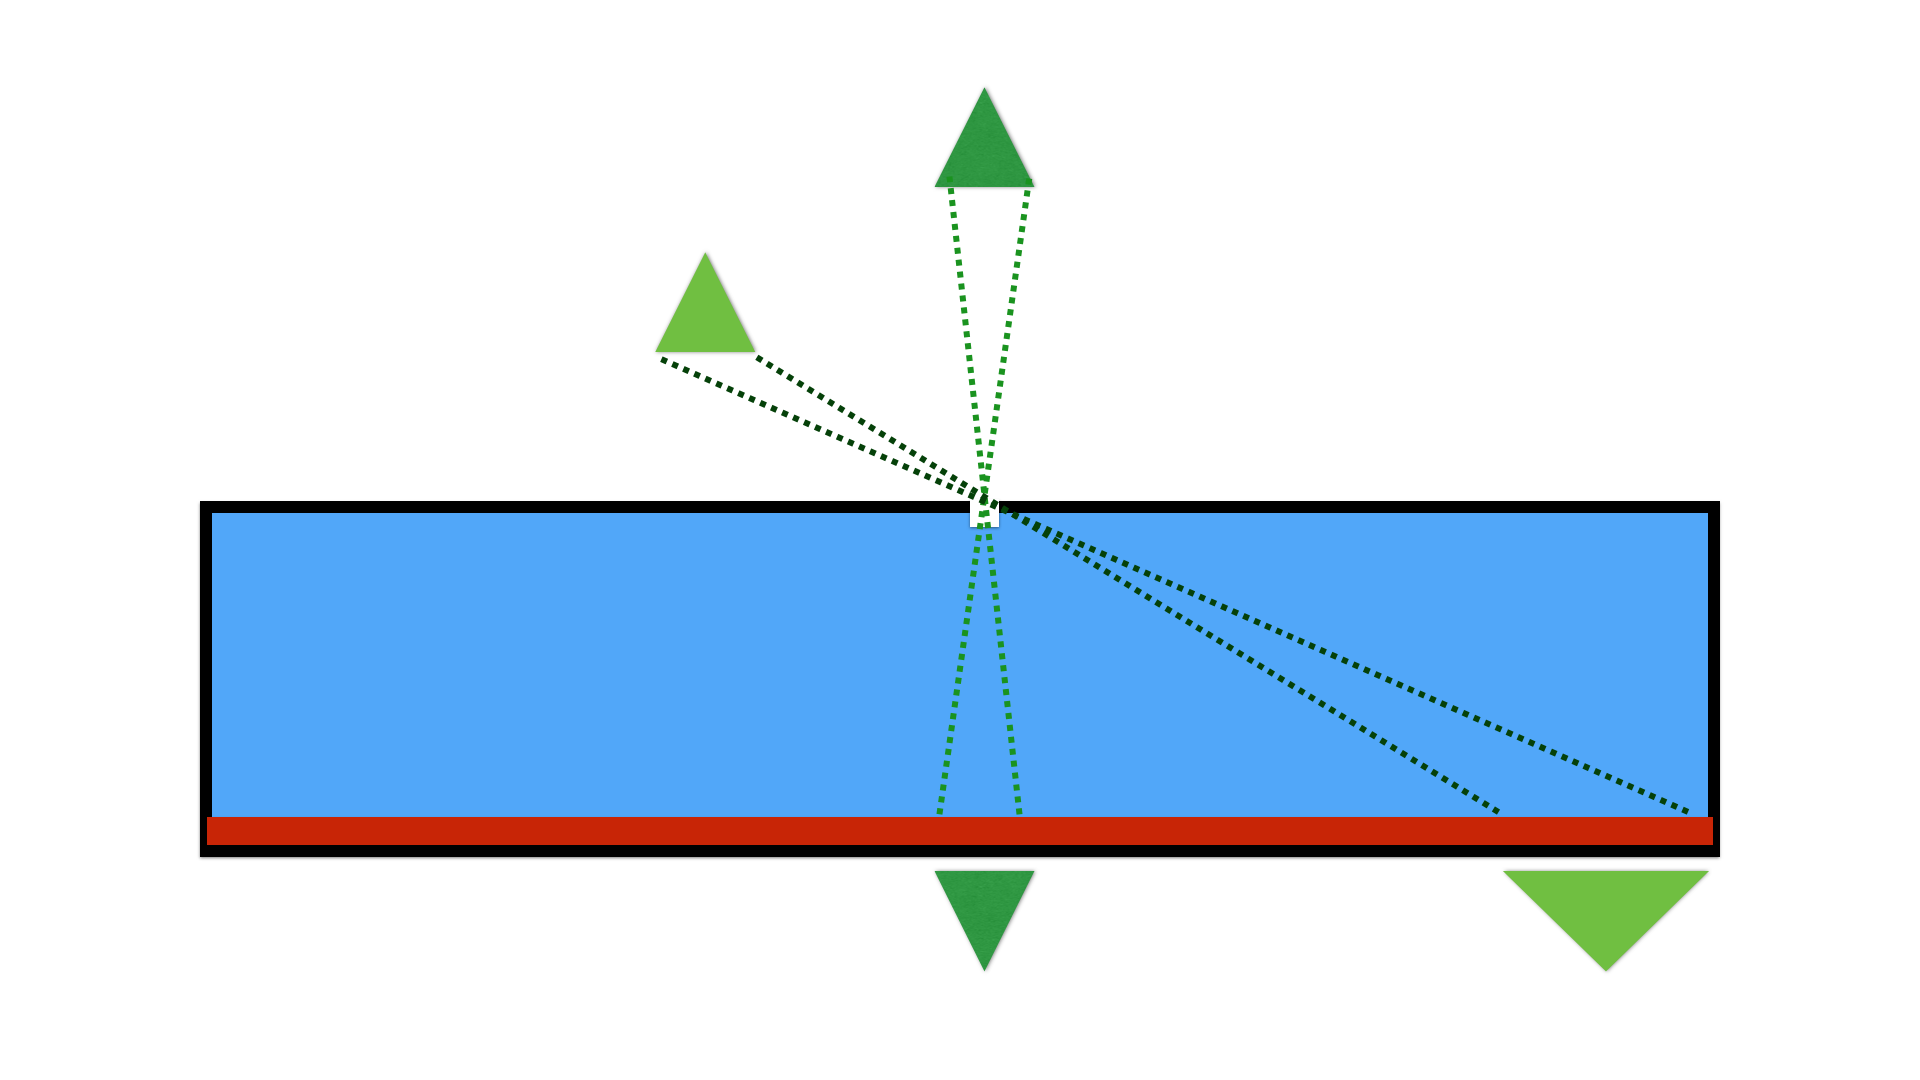 Figure 4: Distortion of rectilinear projection for objects equally distant from pinhole, but seen from different angles